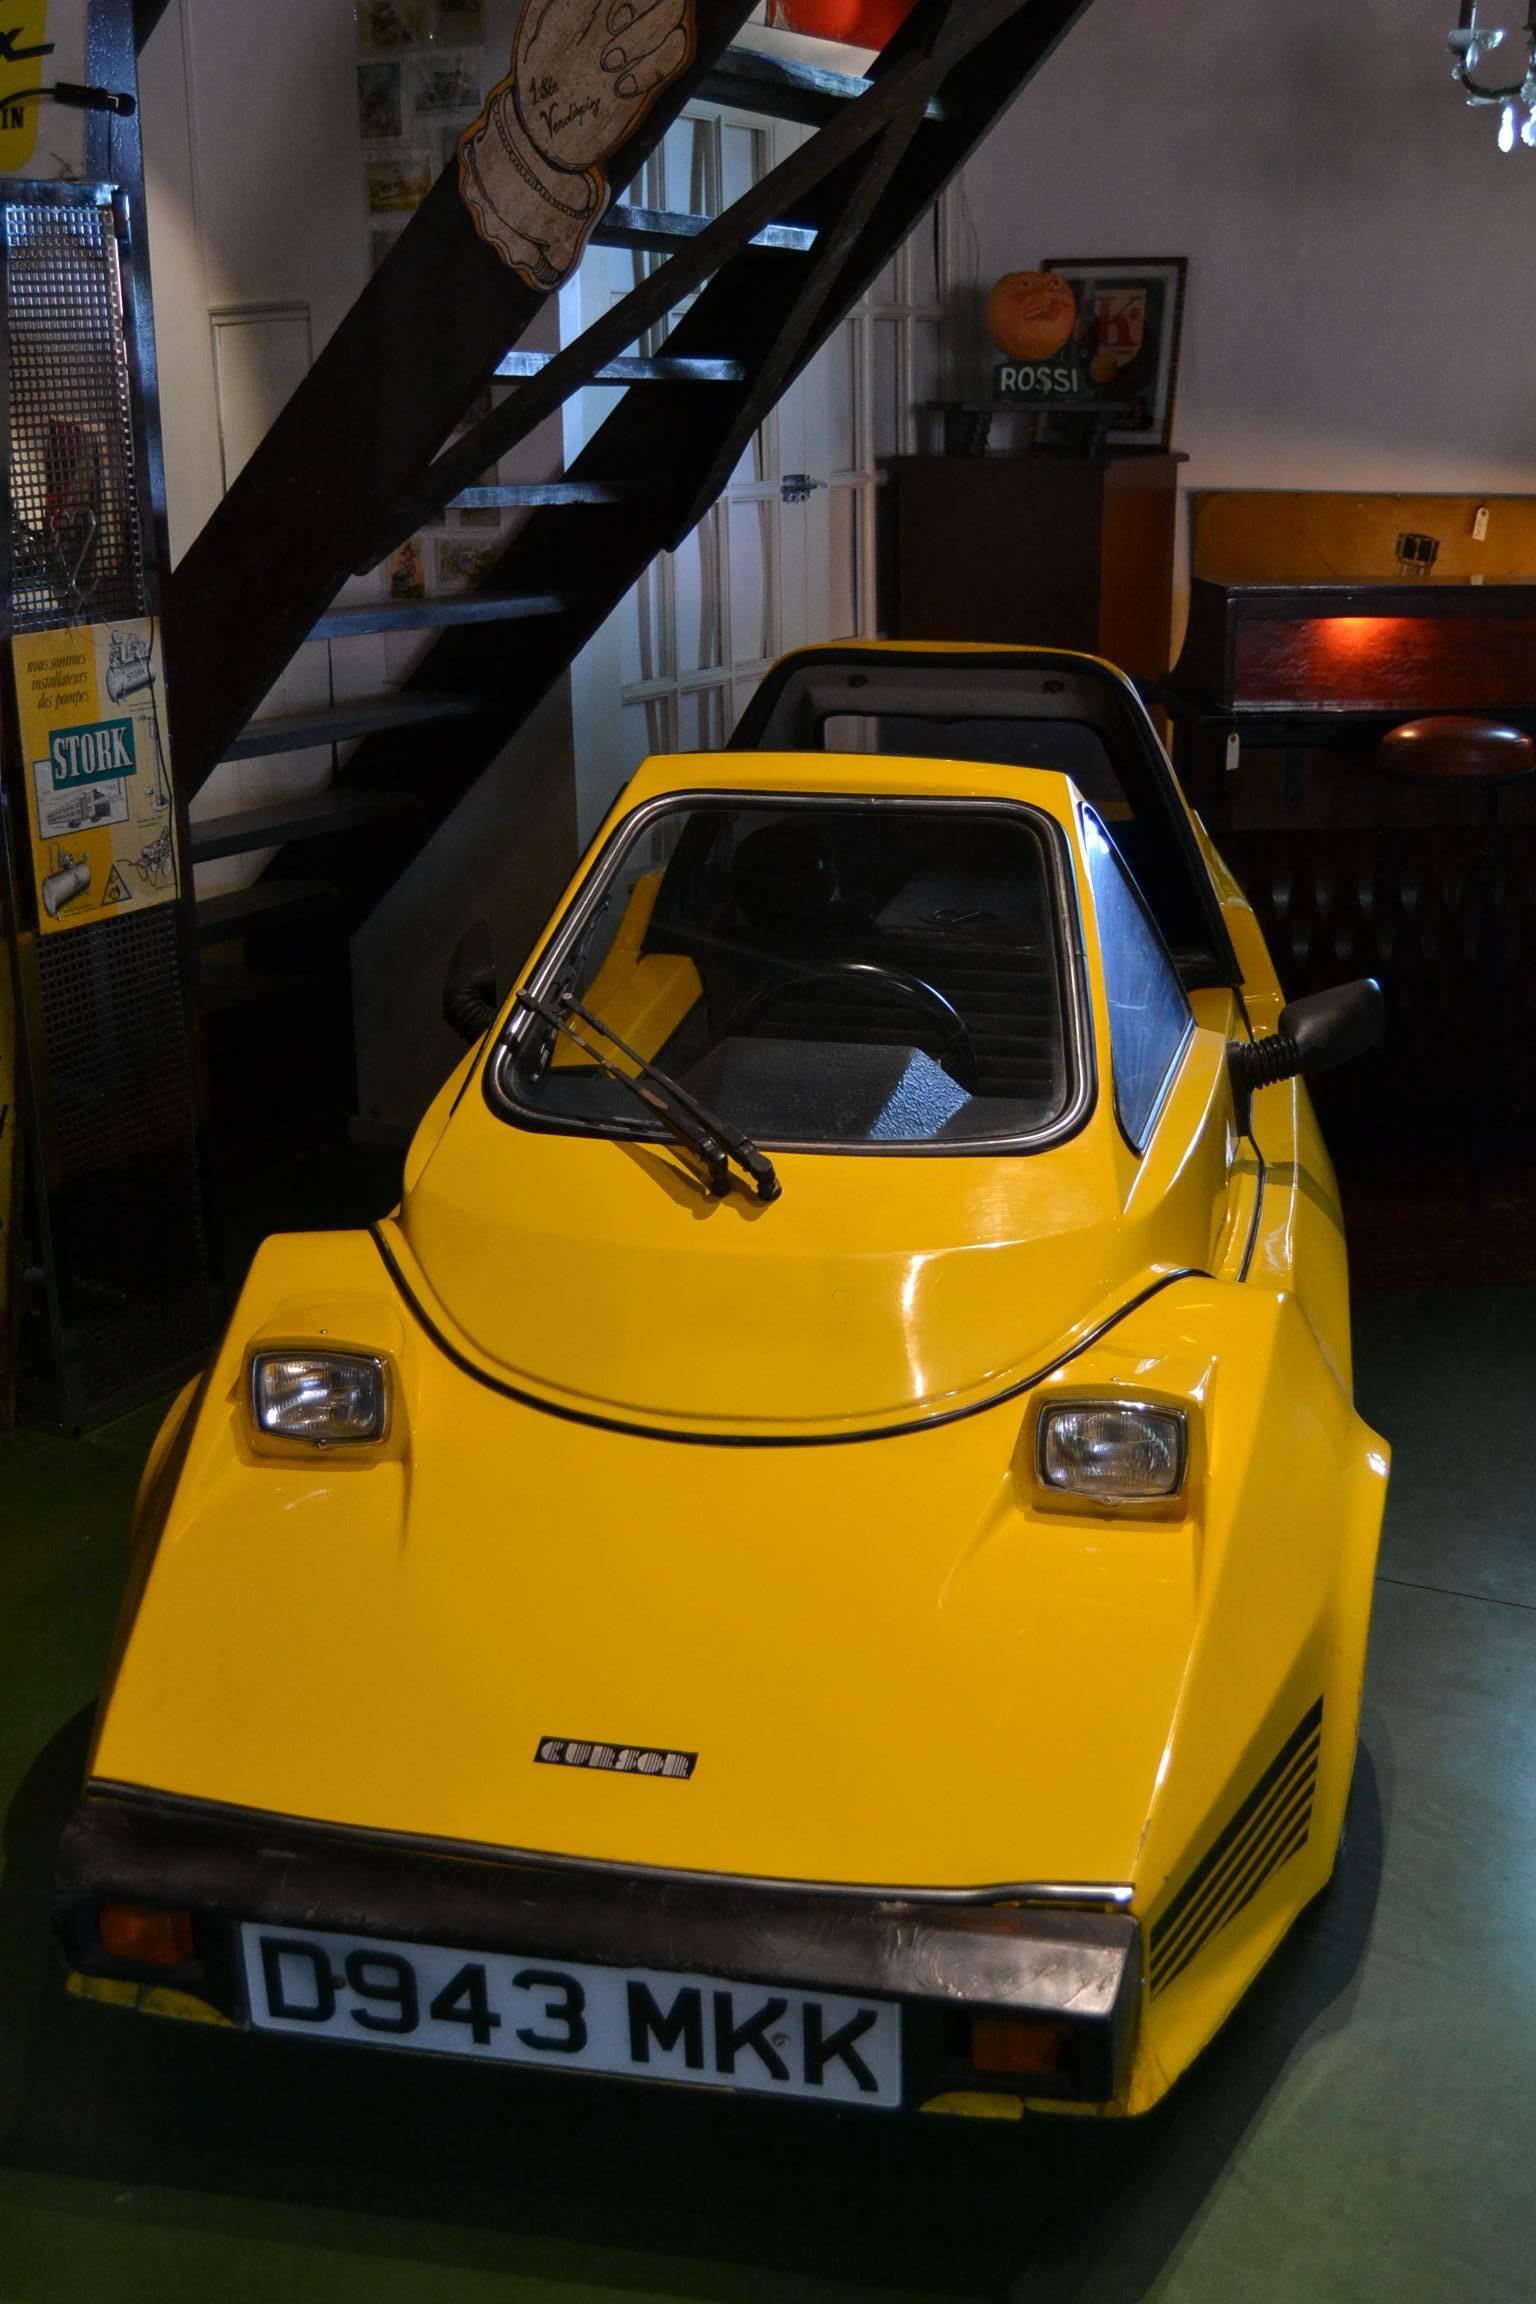 Cursor microcar bubblecar tricycle.
Designed by Alan Hatswell to fit moped regulations in the UK.
Made by Replicar Limited, UK (Kent) 1985-1987.
Production: 100 pieces worldwide.

Re-enforced fibreglass body on tubular steel chassis.
Electric